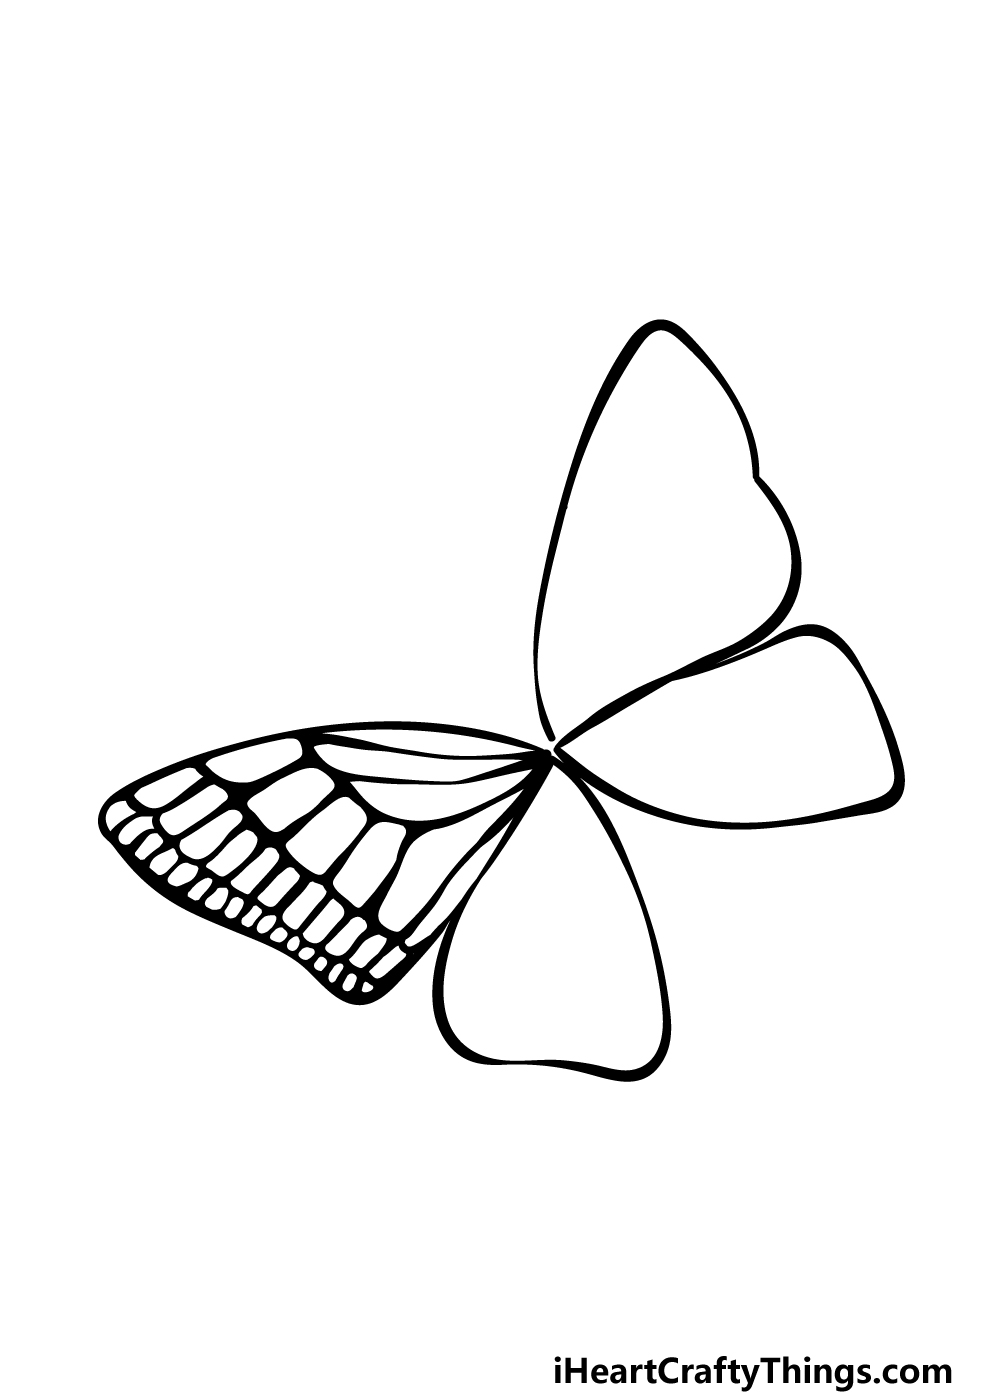 Colorful Butterfly Drawing - How To Draw A Colorful Butterfly Step ...